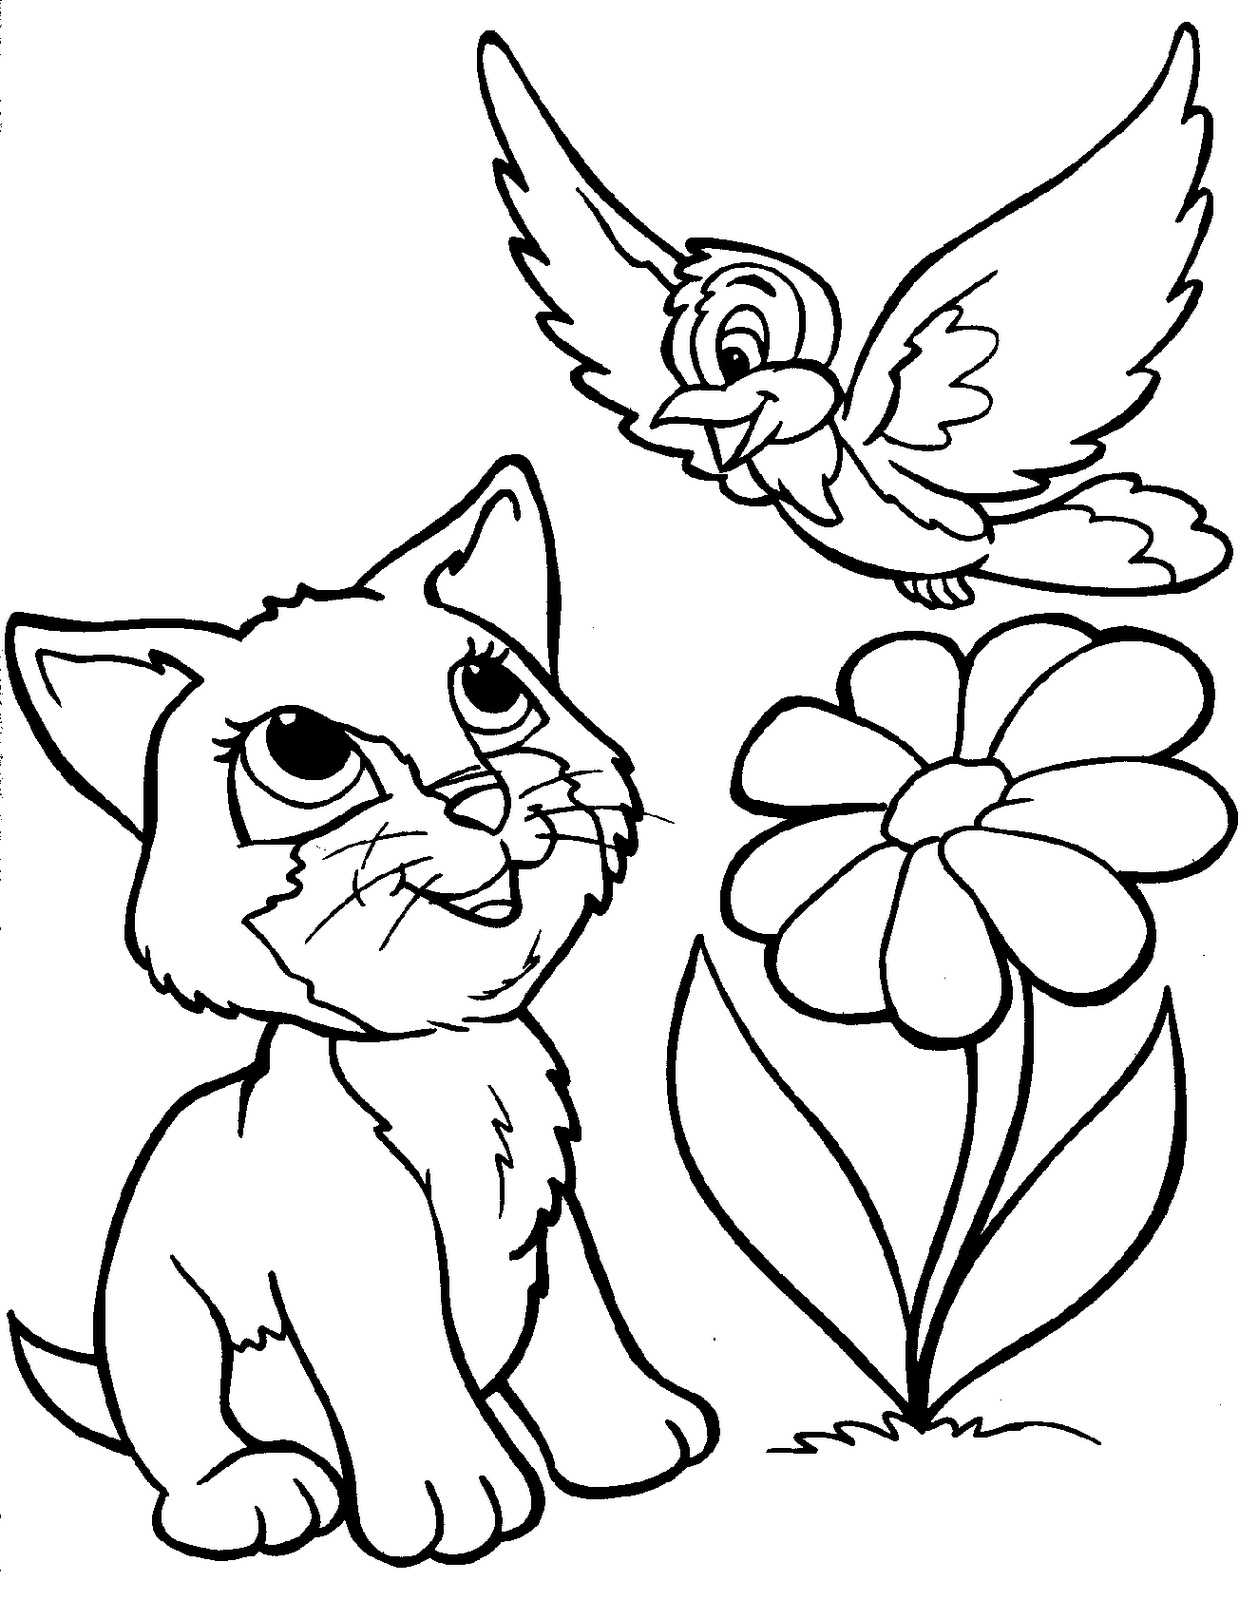 Download 10 Cute Animals Coloring Pages